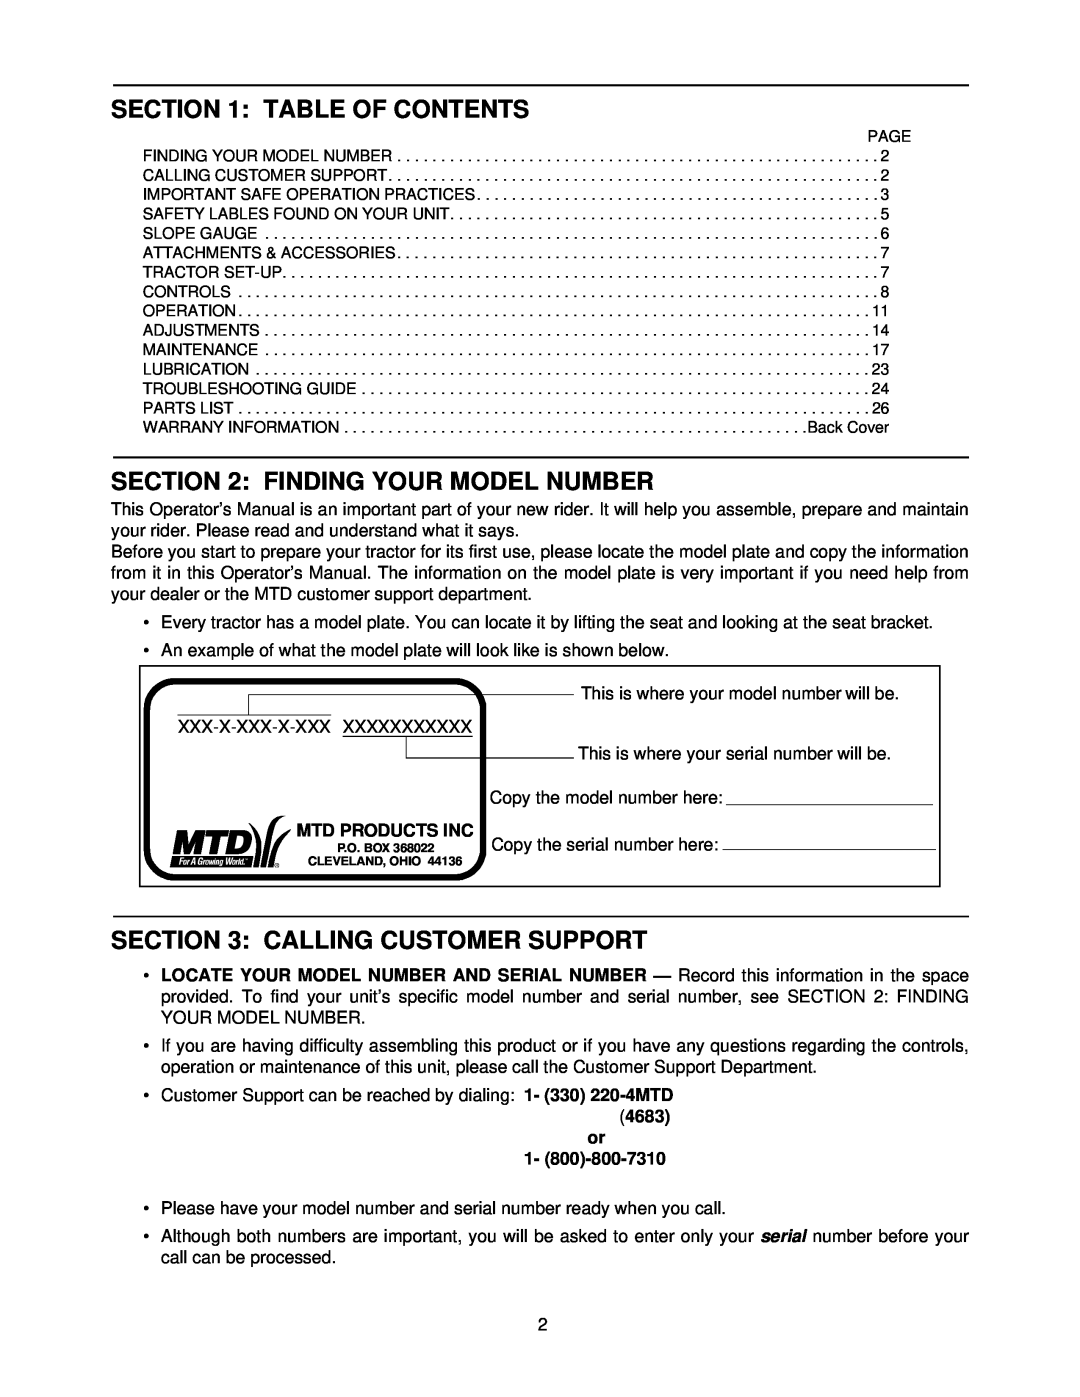 Yard-Man 247.27432 manual Table Of Contents, Finding Your Model Number, Calling Customer Support, Mtd Products Inc, 4683 or 